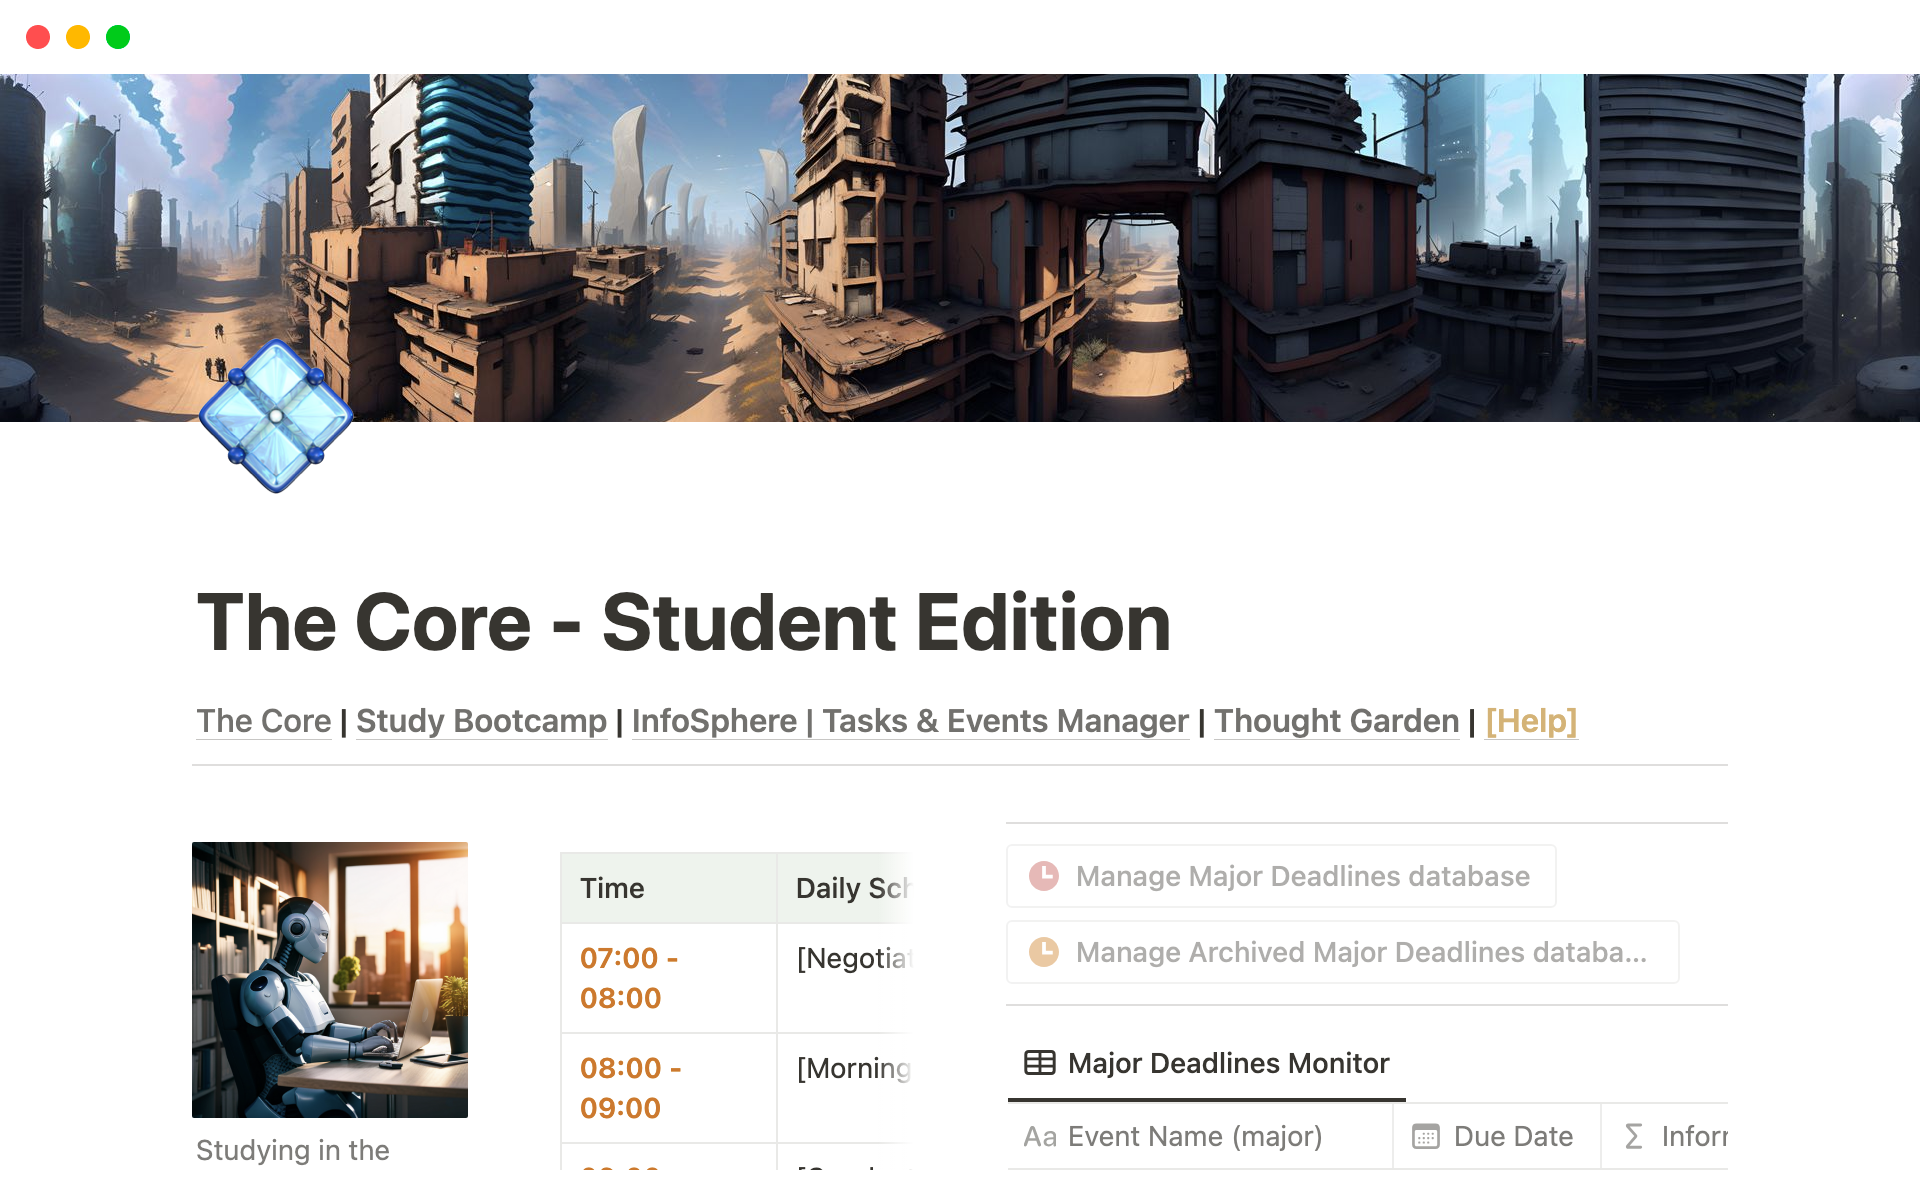 The Student Edition of 'The Core' elevates the Basic Edition with an intentional focus on academic enhancement.